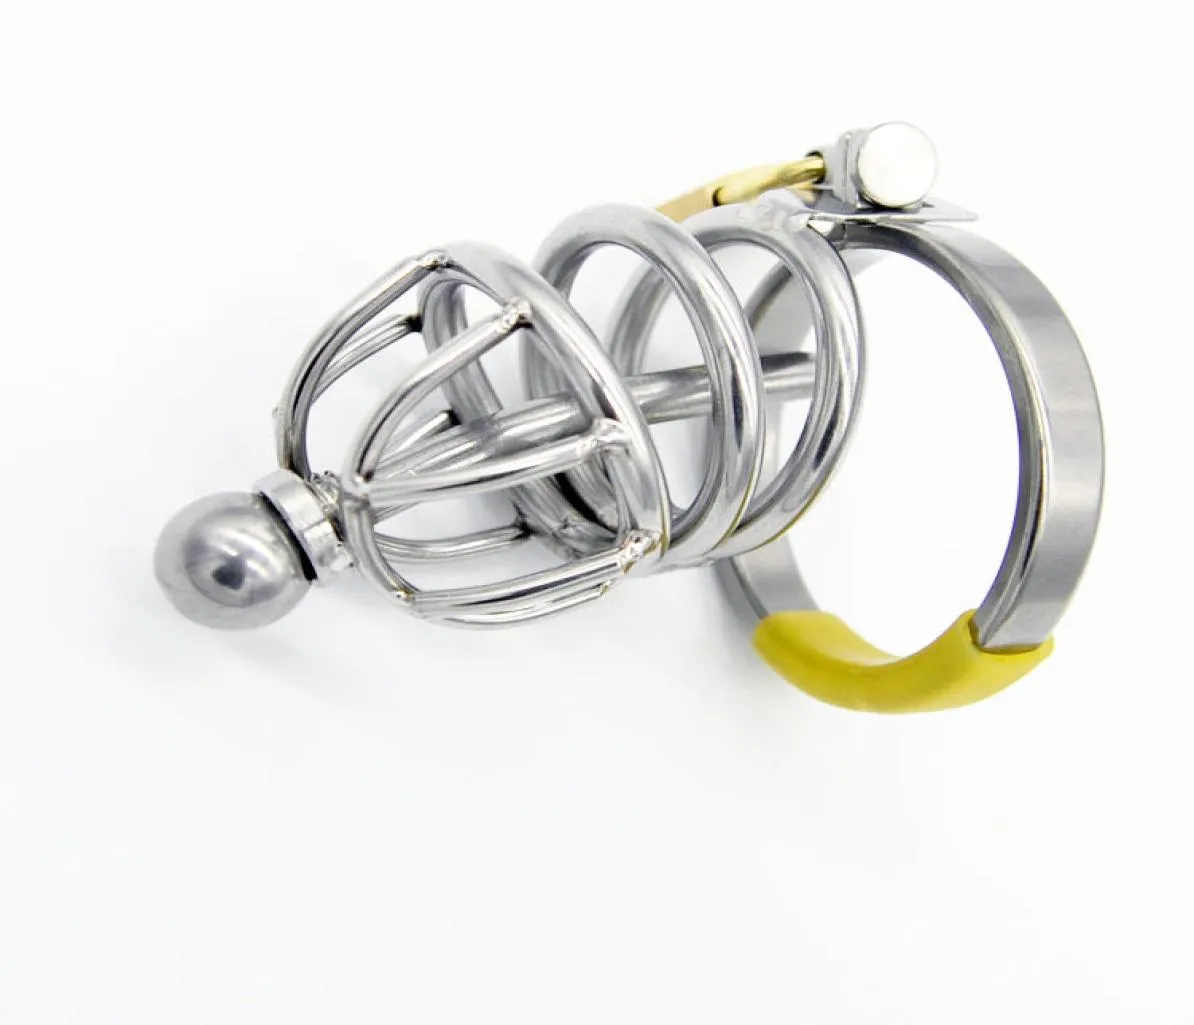 Chastity Devices Sexy MonaLisa The Male Standard Stainless Steel Chastity Locking Cage and Tube R475892419